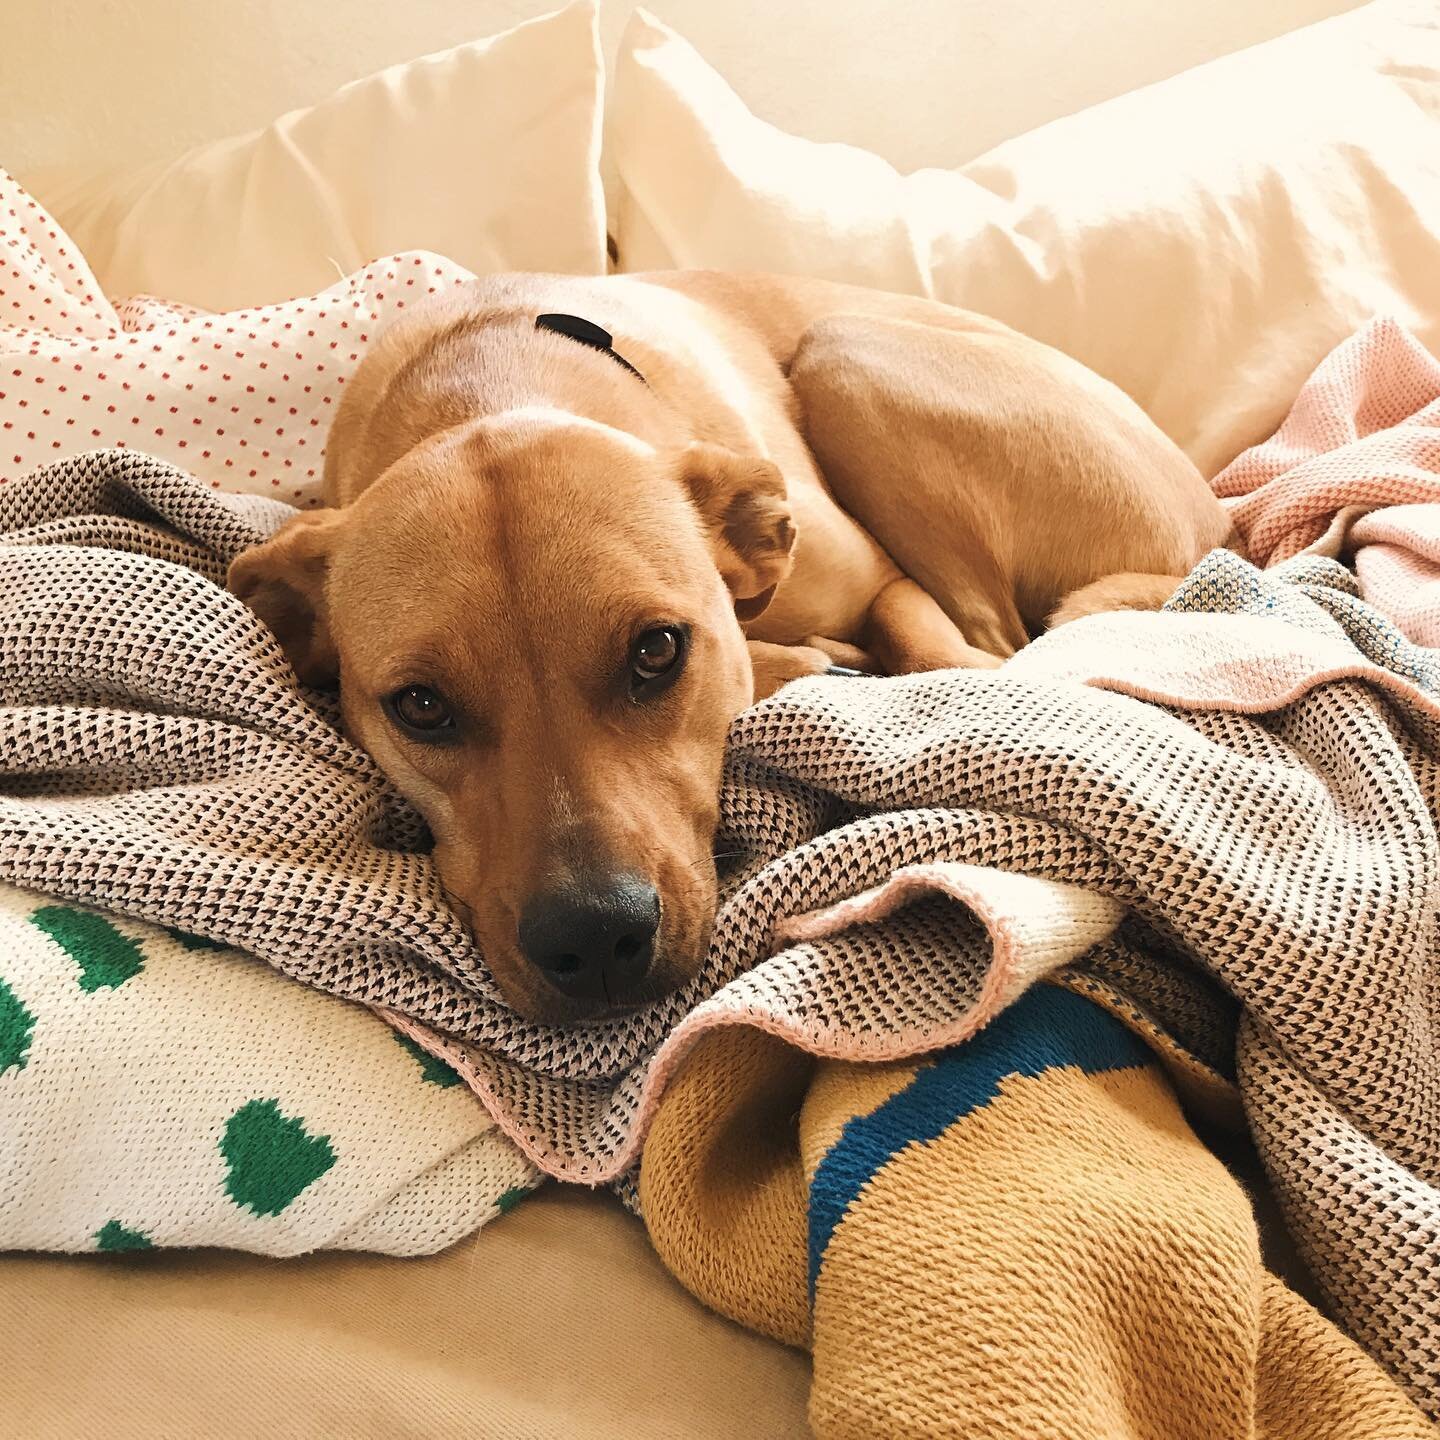 Honey and her blankets